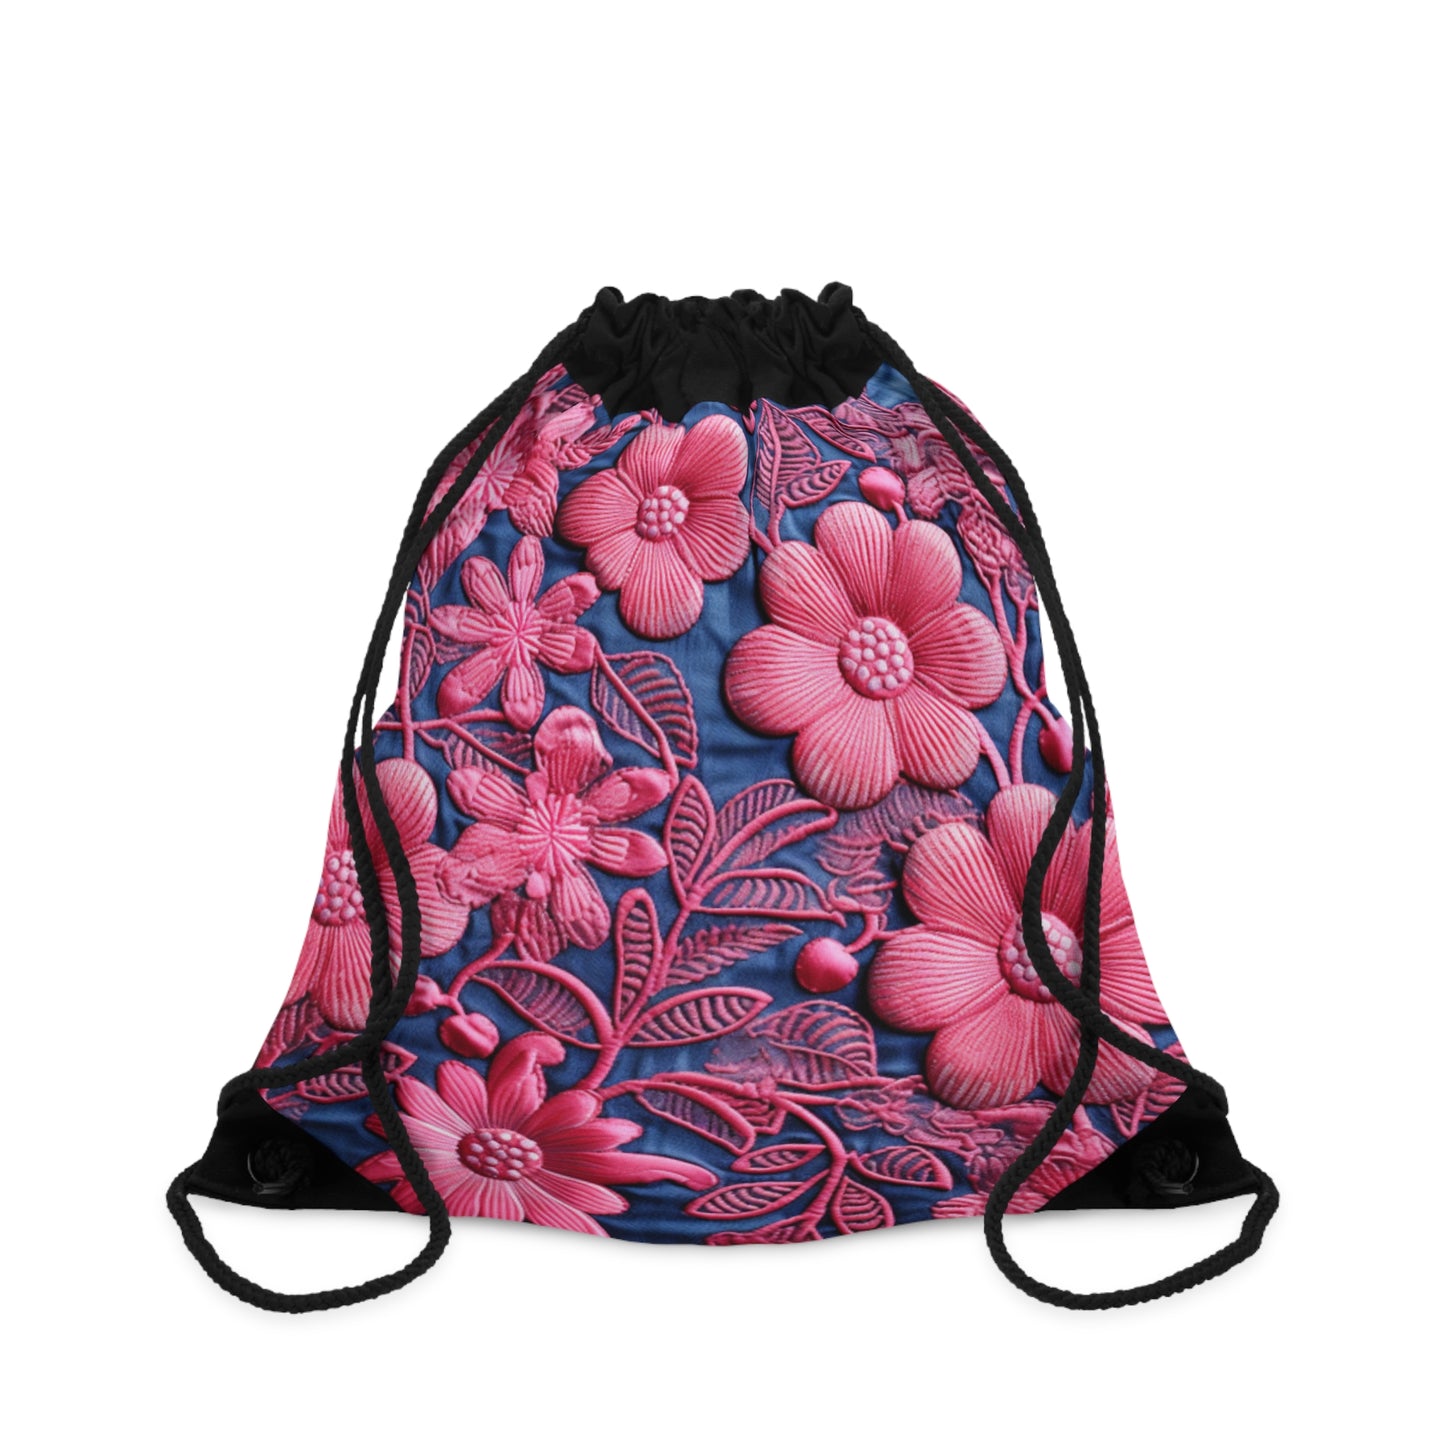 Denim Blue Doll Pink Floral Embroidery Style Fabric Flowers - Drawstring Bag